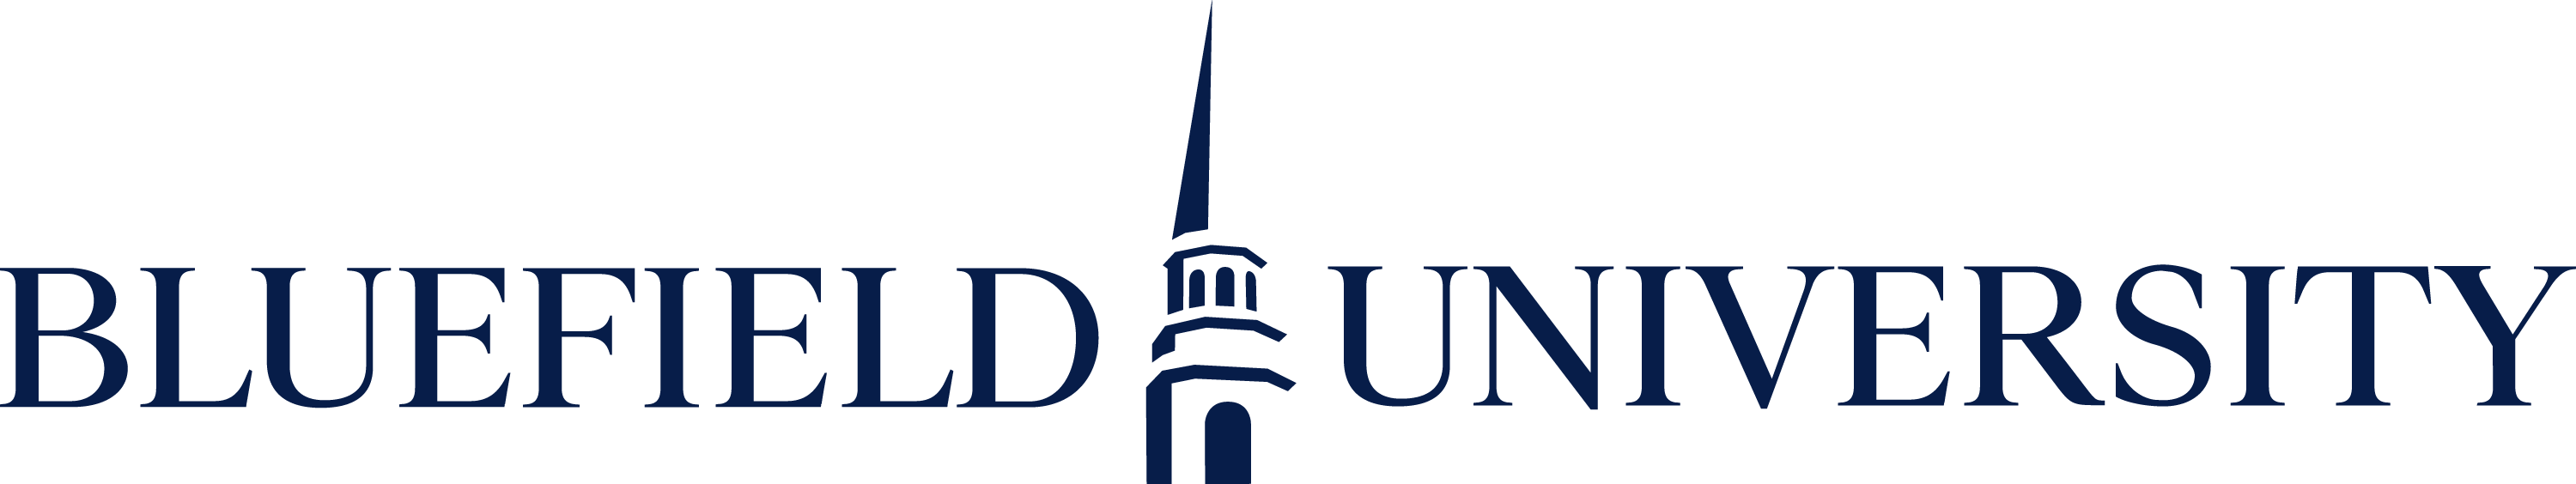 Bluefield University logo with chapel in center in blue.